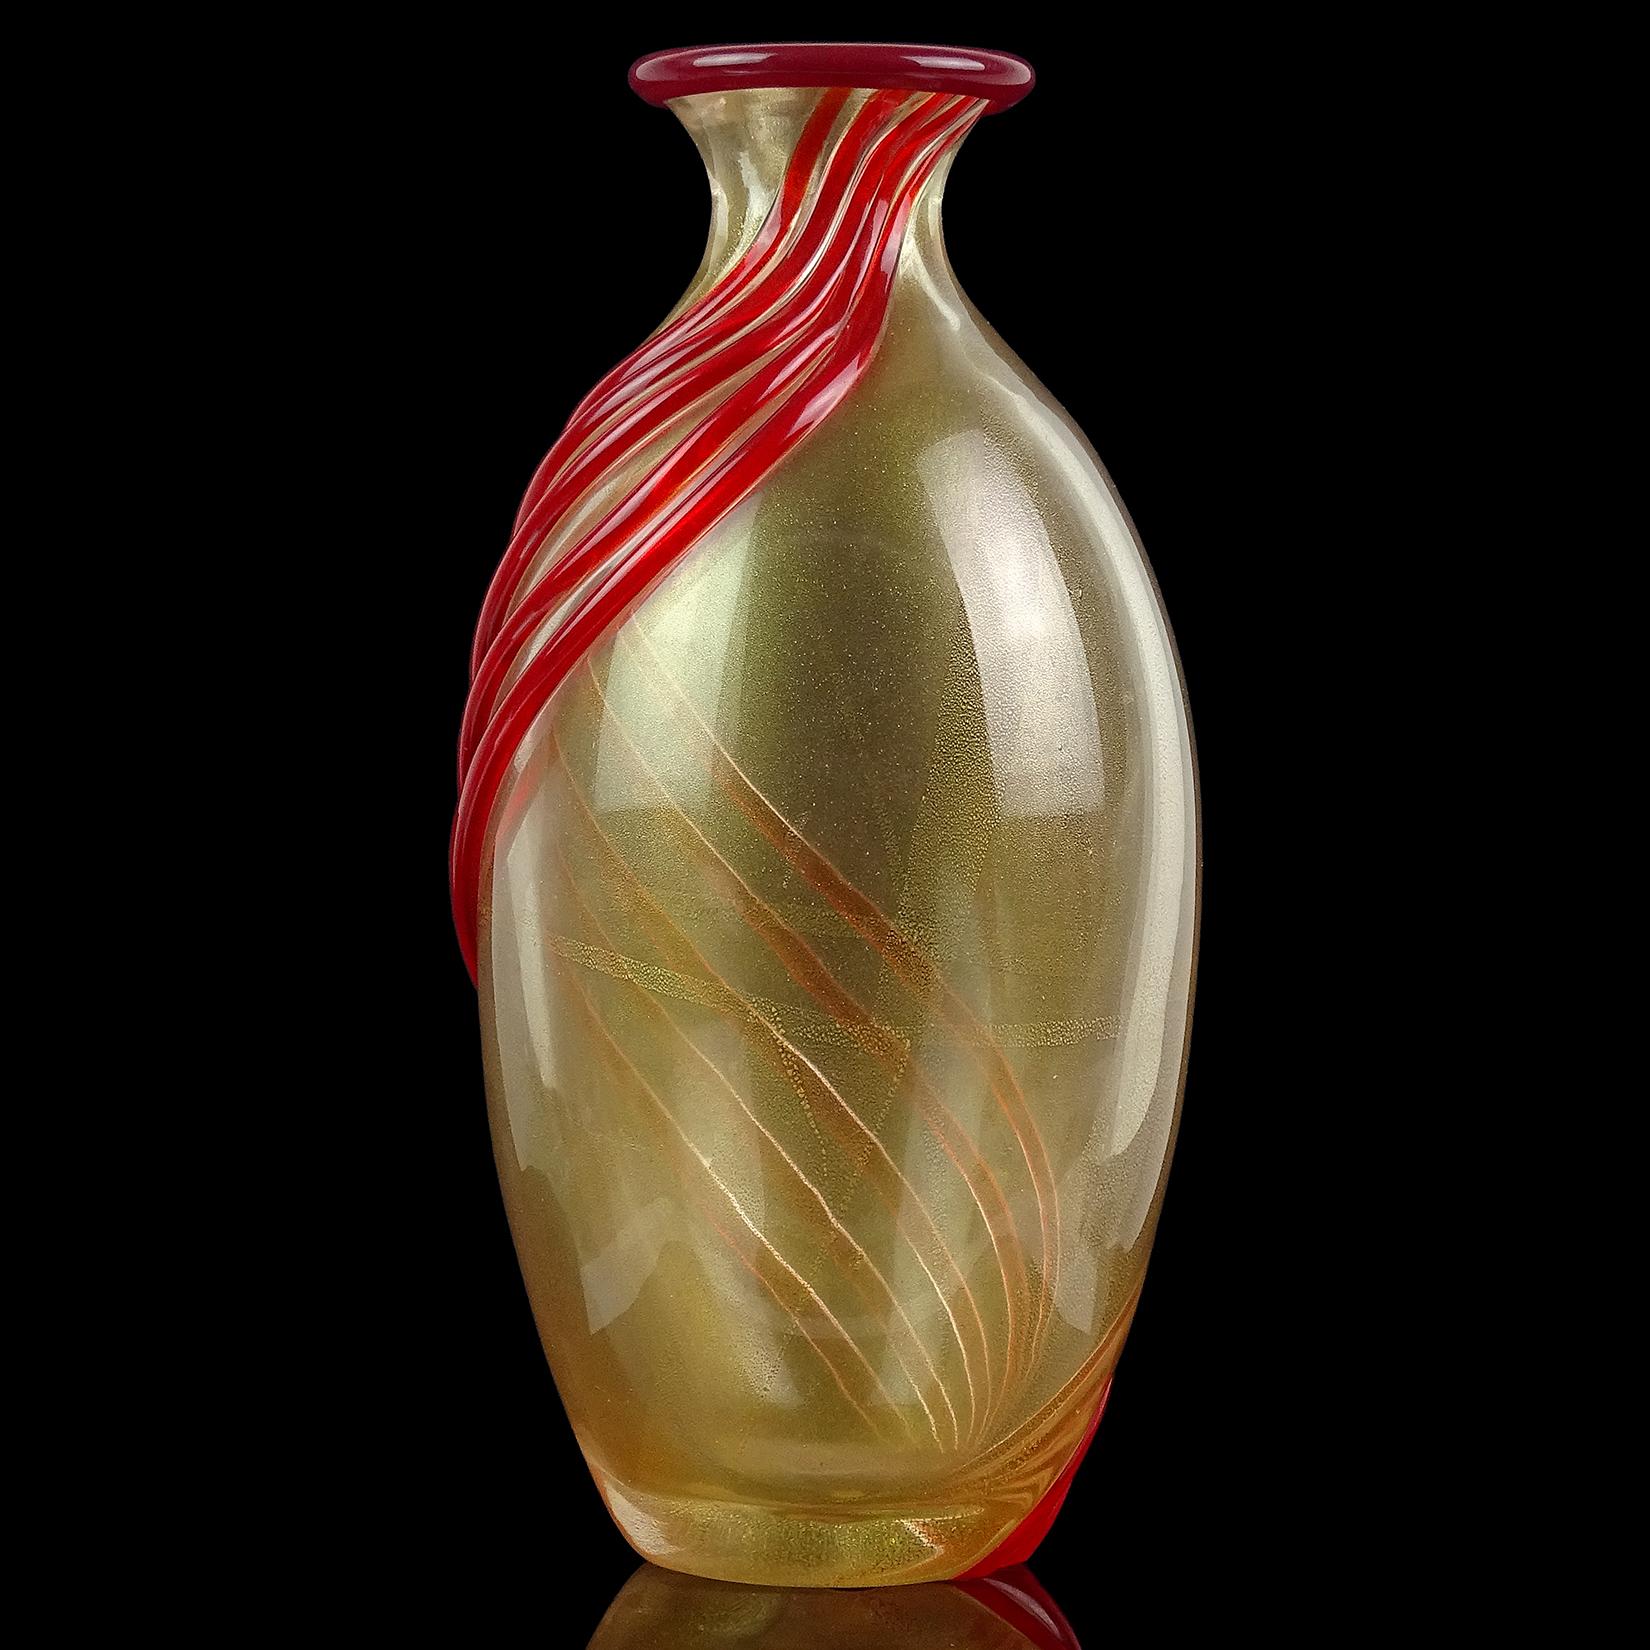 Archimede Seguso Murano Red Bands Gold Flecks Italian Art Glass Flower Vase In Excellent Condition For Sale In Kissimmee, FL